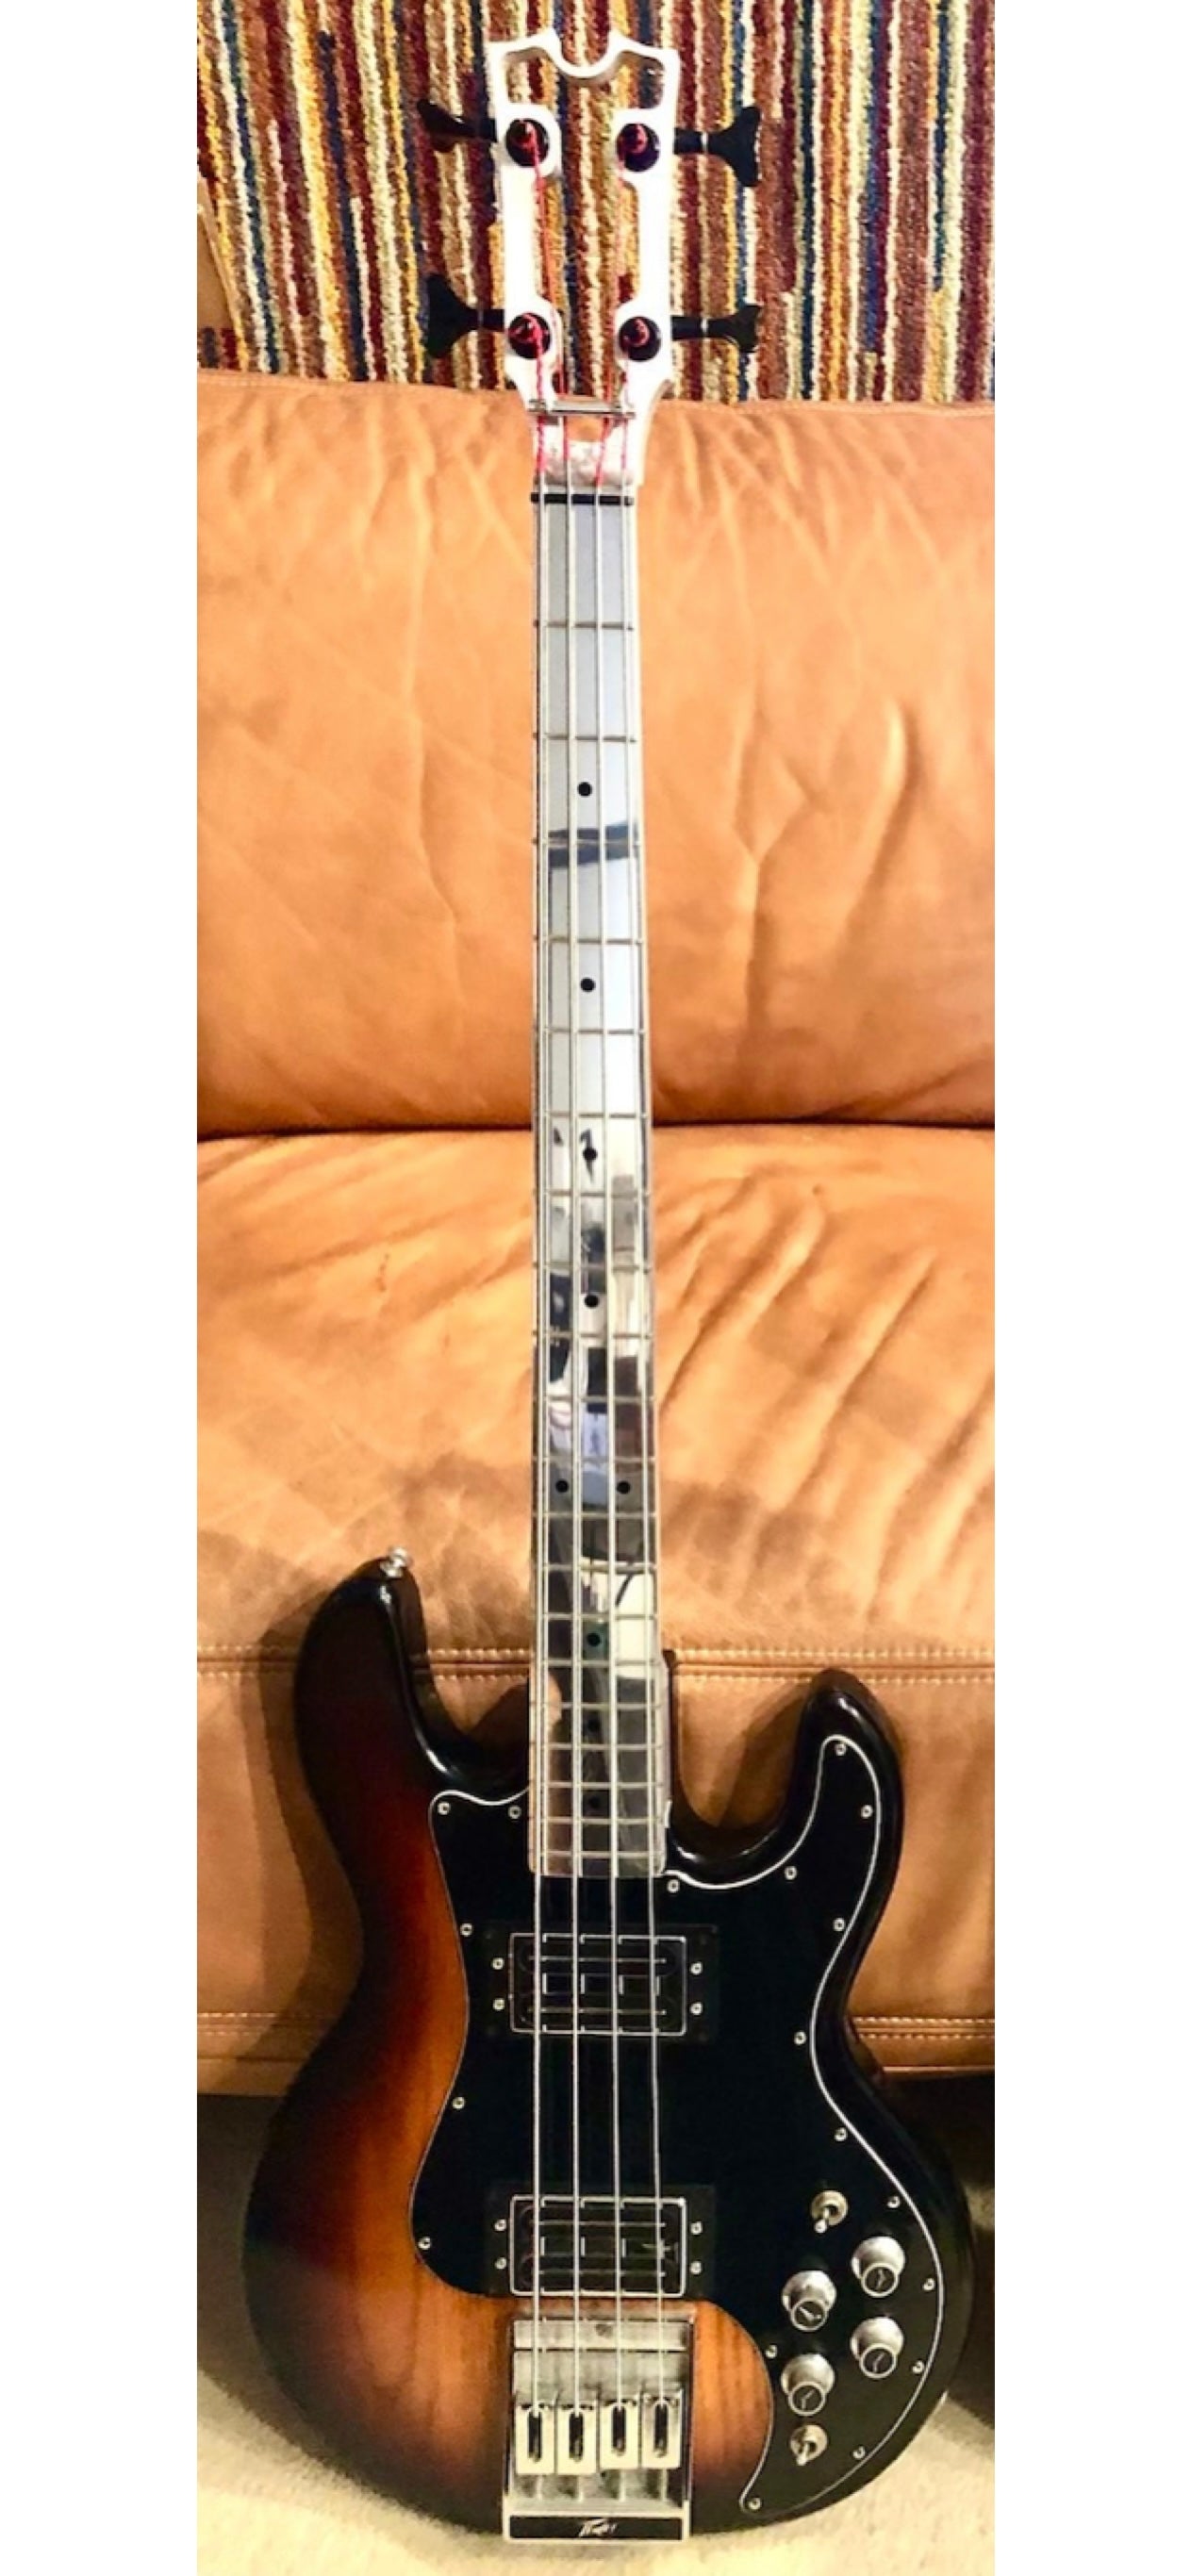 IN STOCK: Premium Hoxey Aluminum Peavey Style T40 Bass Replacement Neck 2x2 Headstock